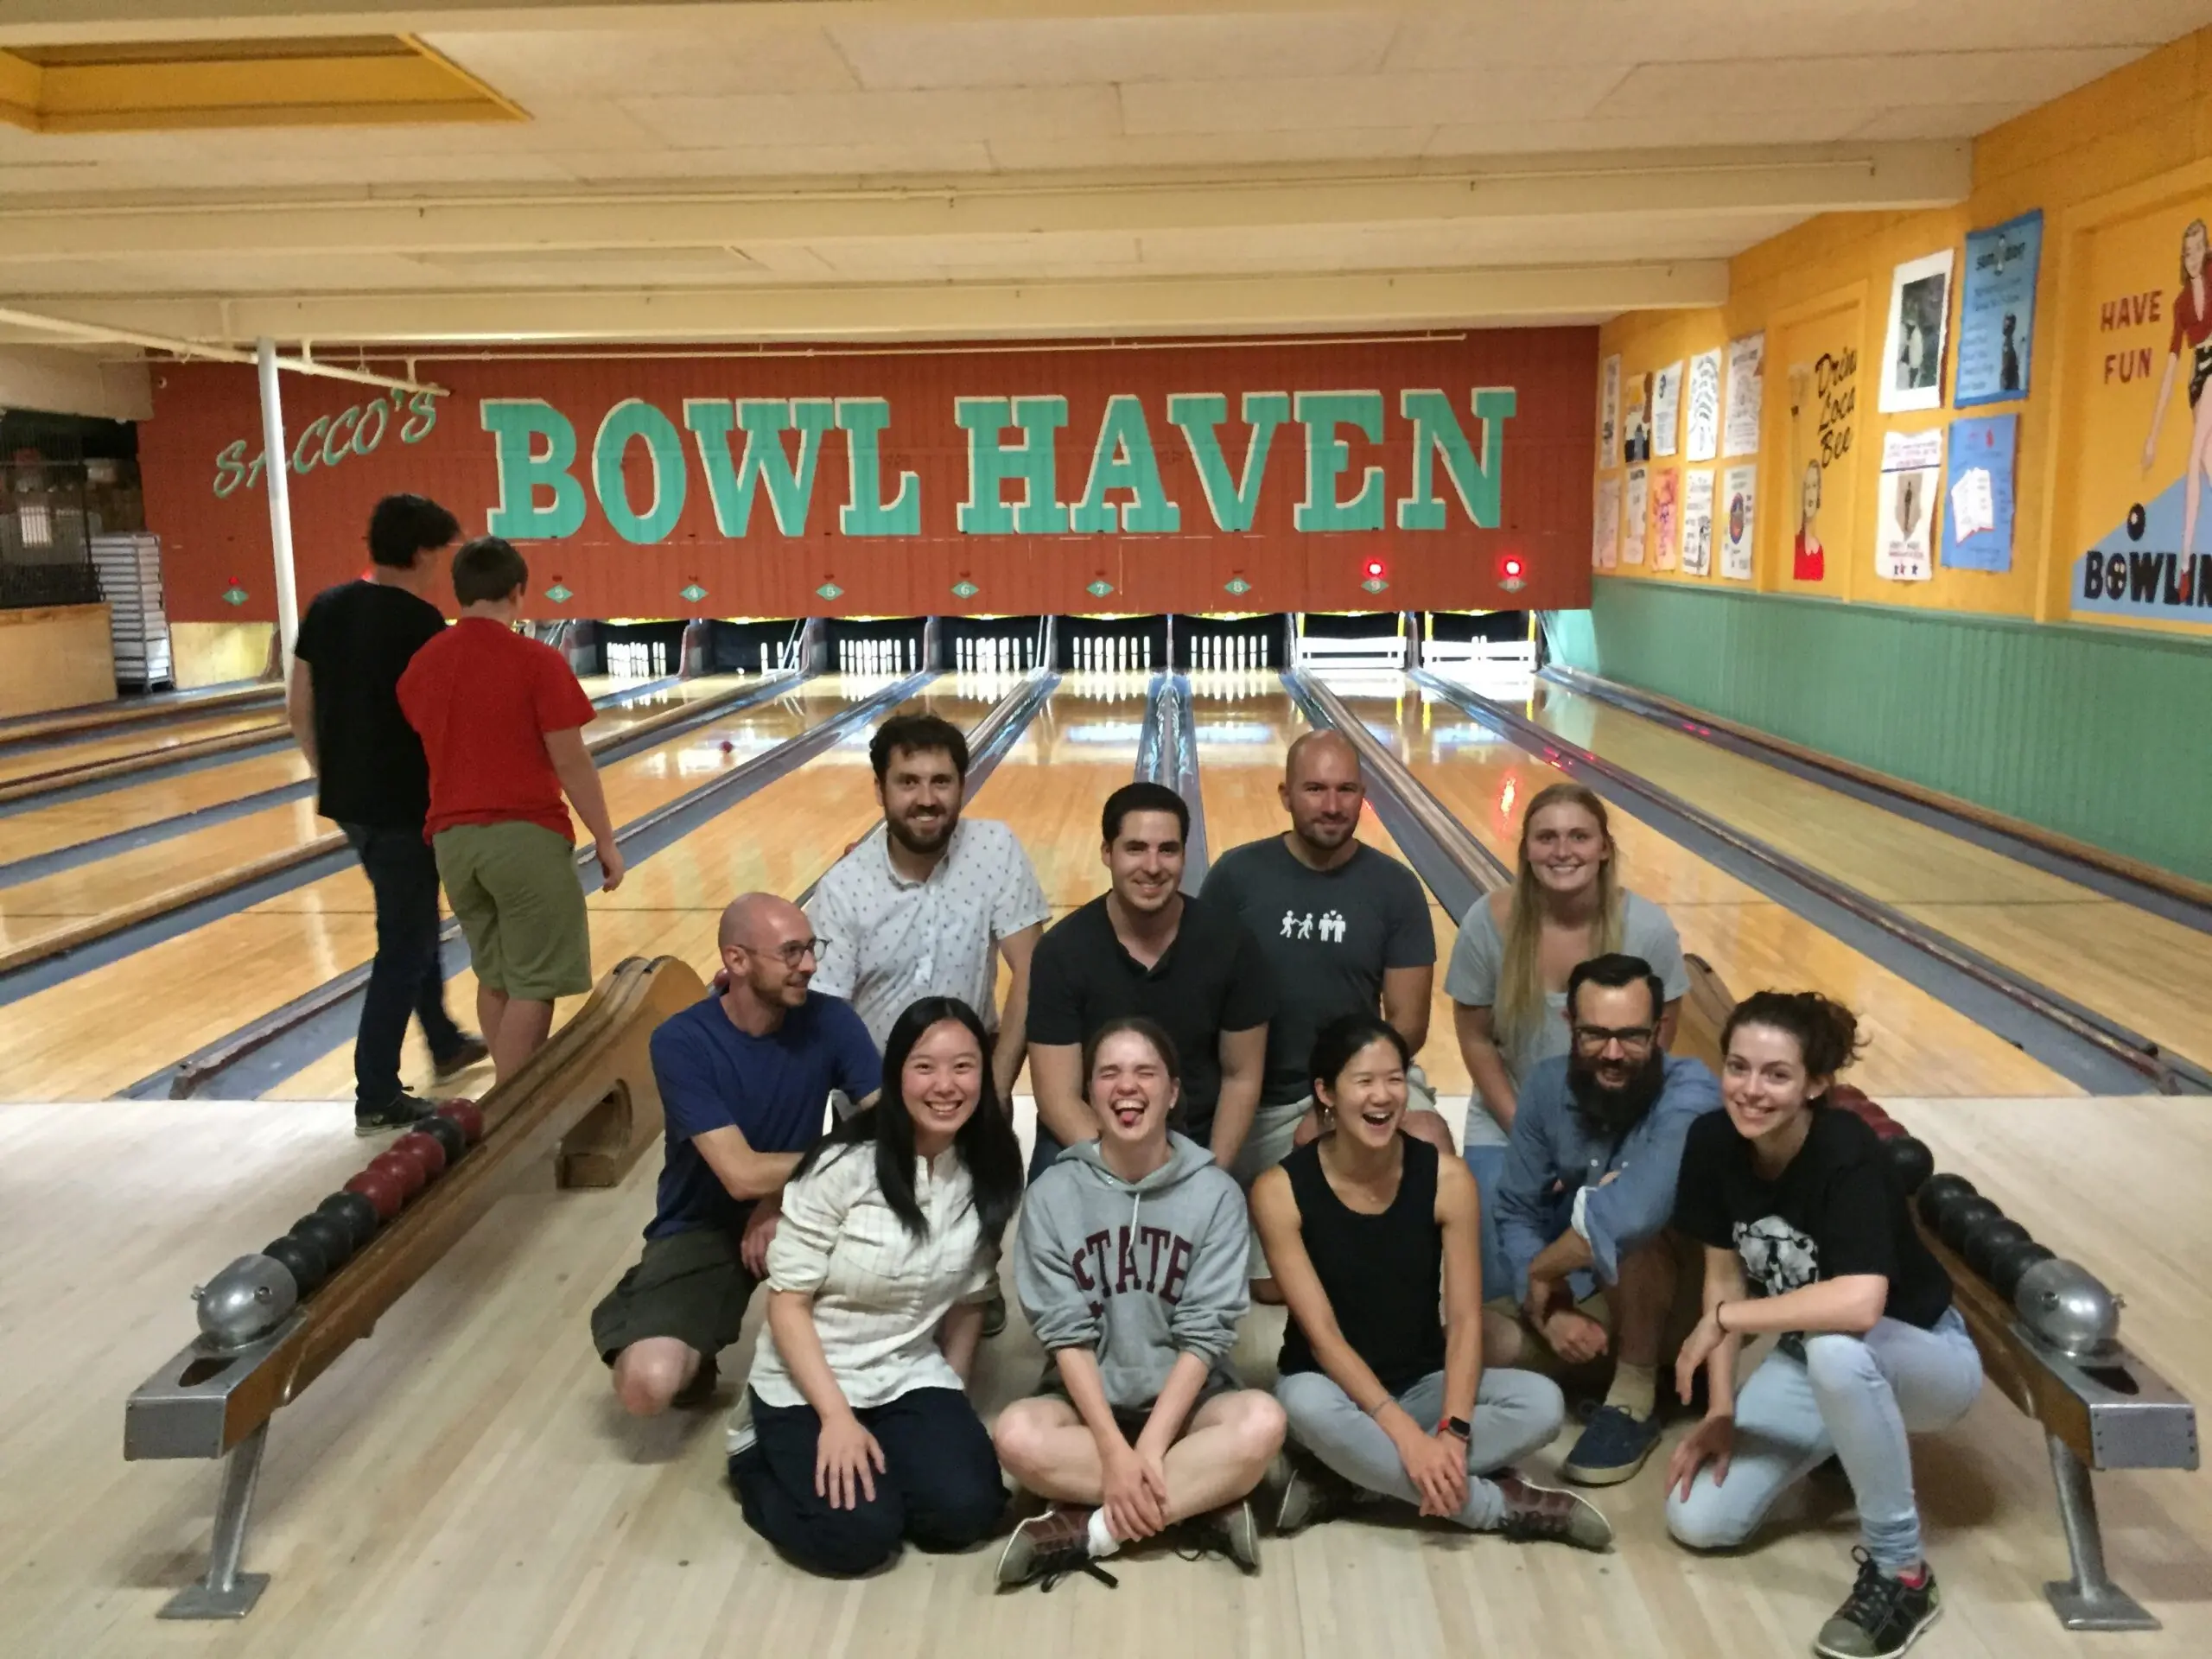 The lab celebrates their improved candlepin skills